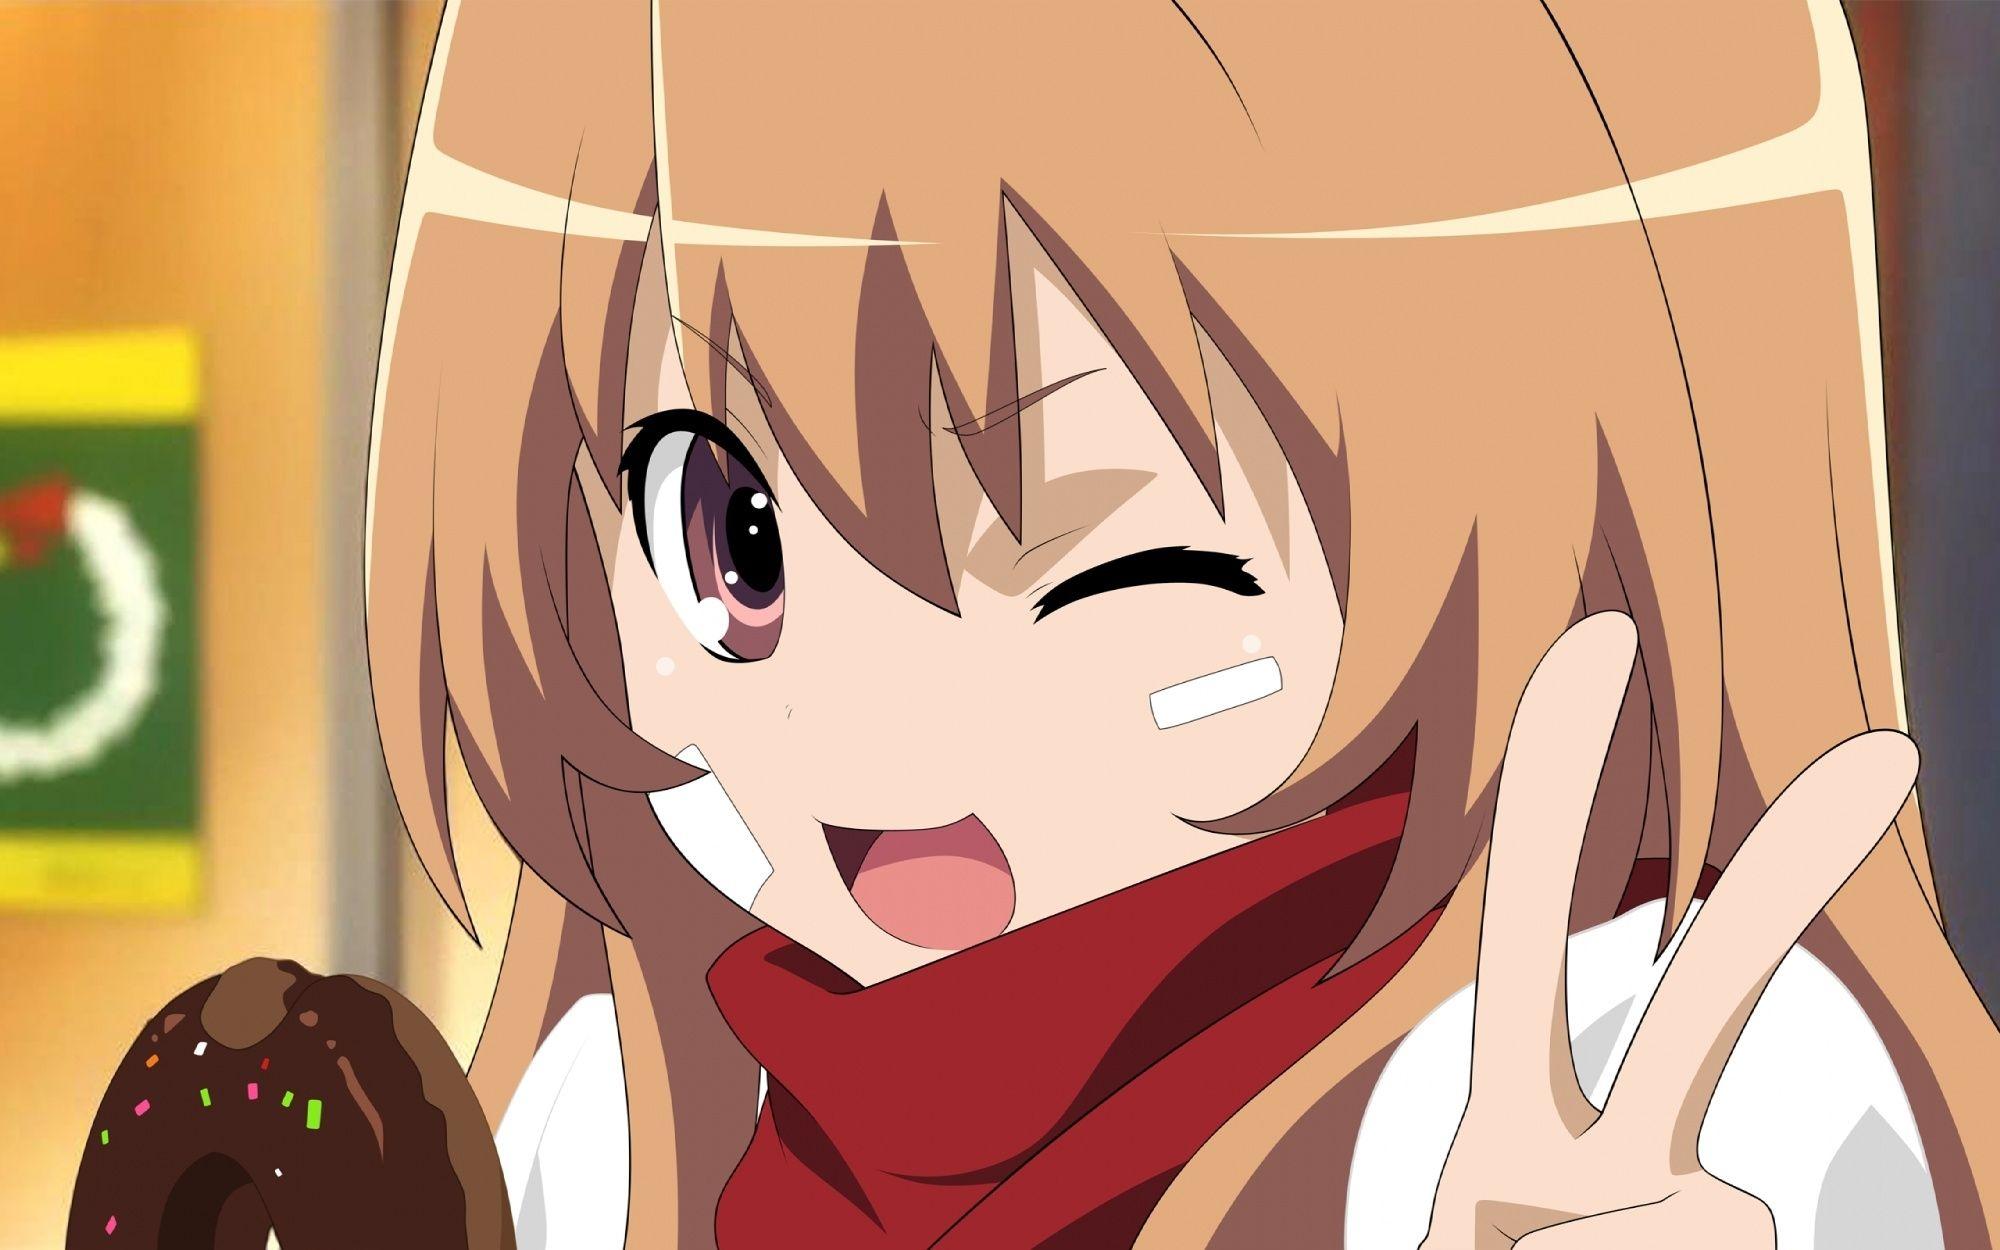 Give Me Your Taiga Toradora! Wallpaper! I'm In Need Of Wallpaper Of My Best Girl! XD